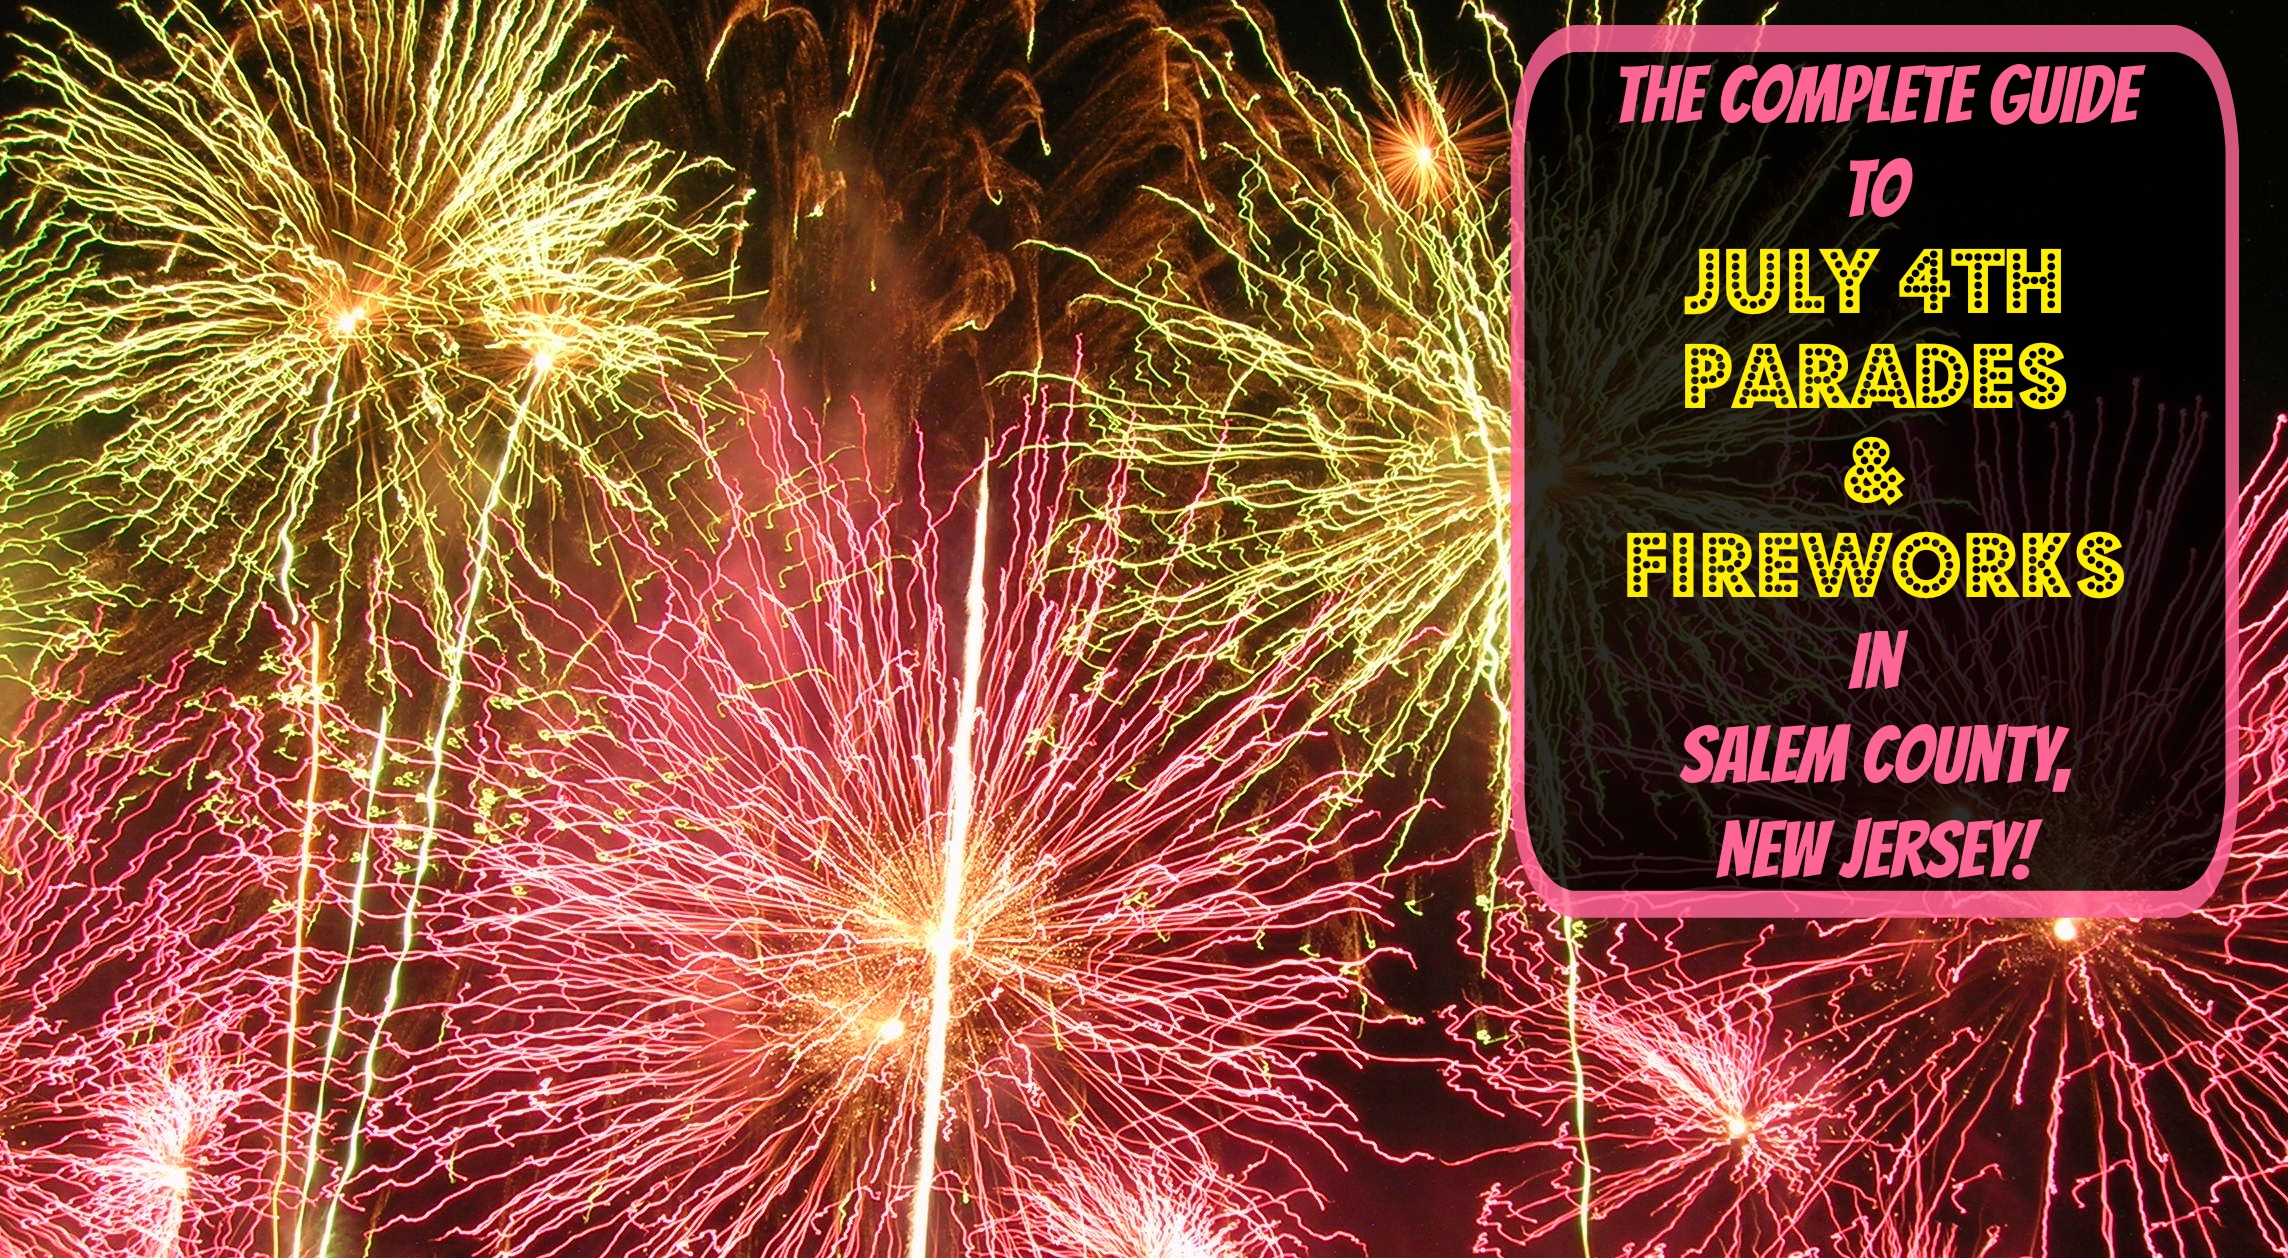 The Complete Guide to July 4th Fireworks in Salem County NJ 2018